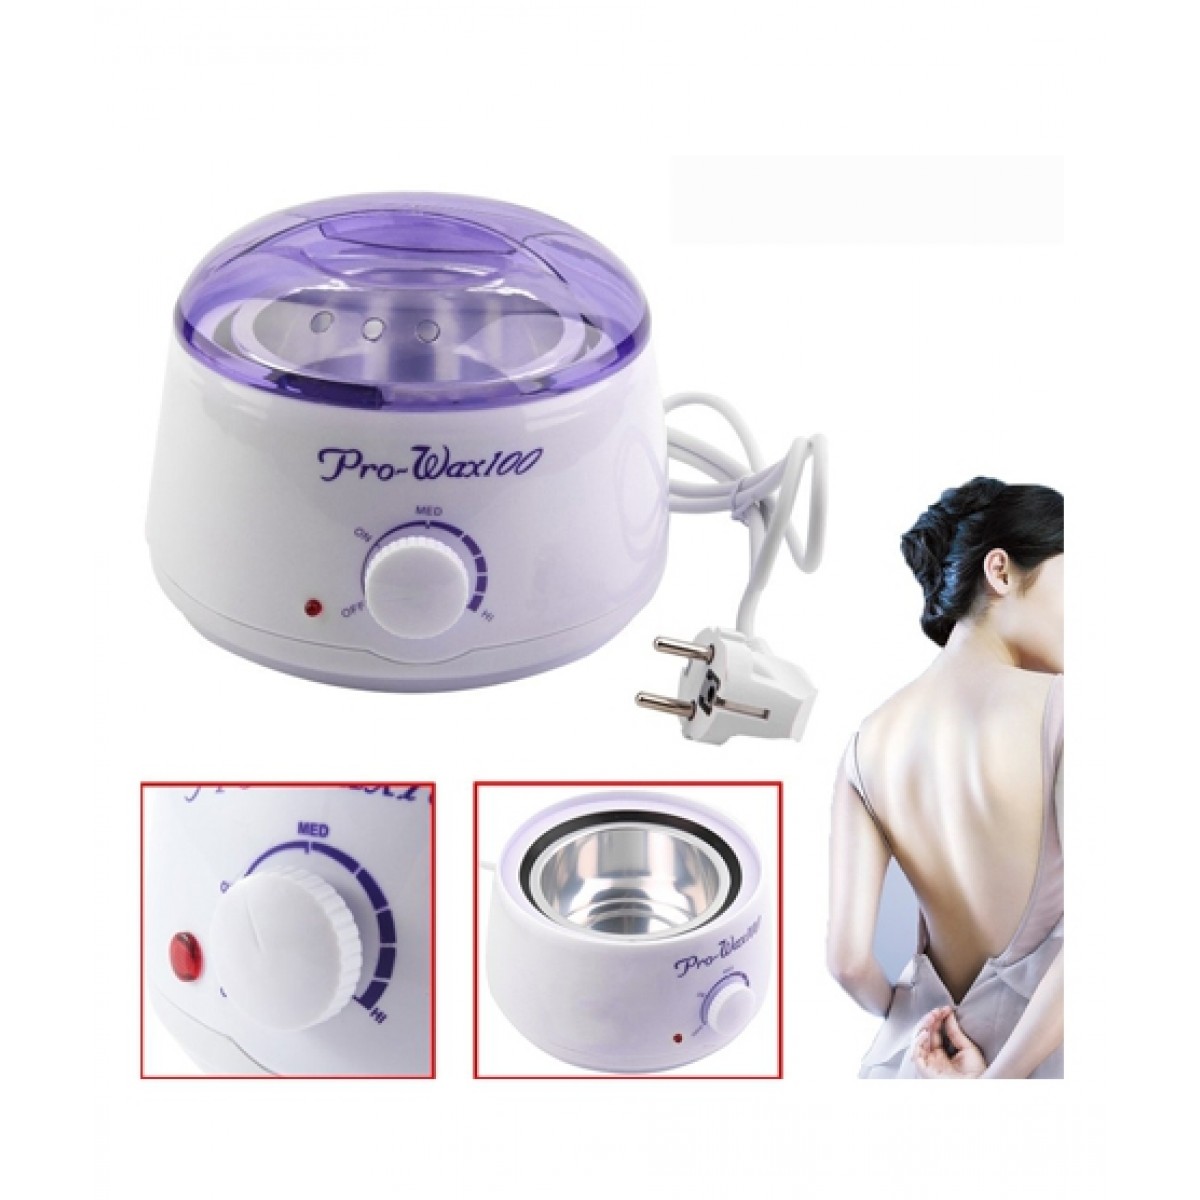 100 Professional Wax Heater And - Aryanas